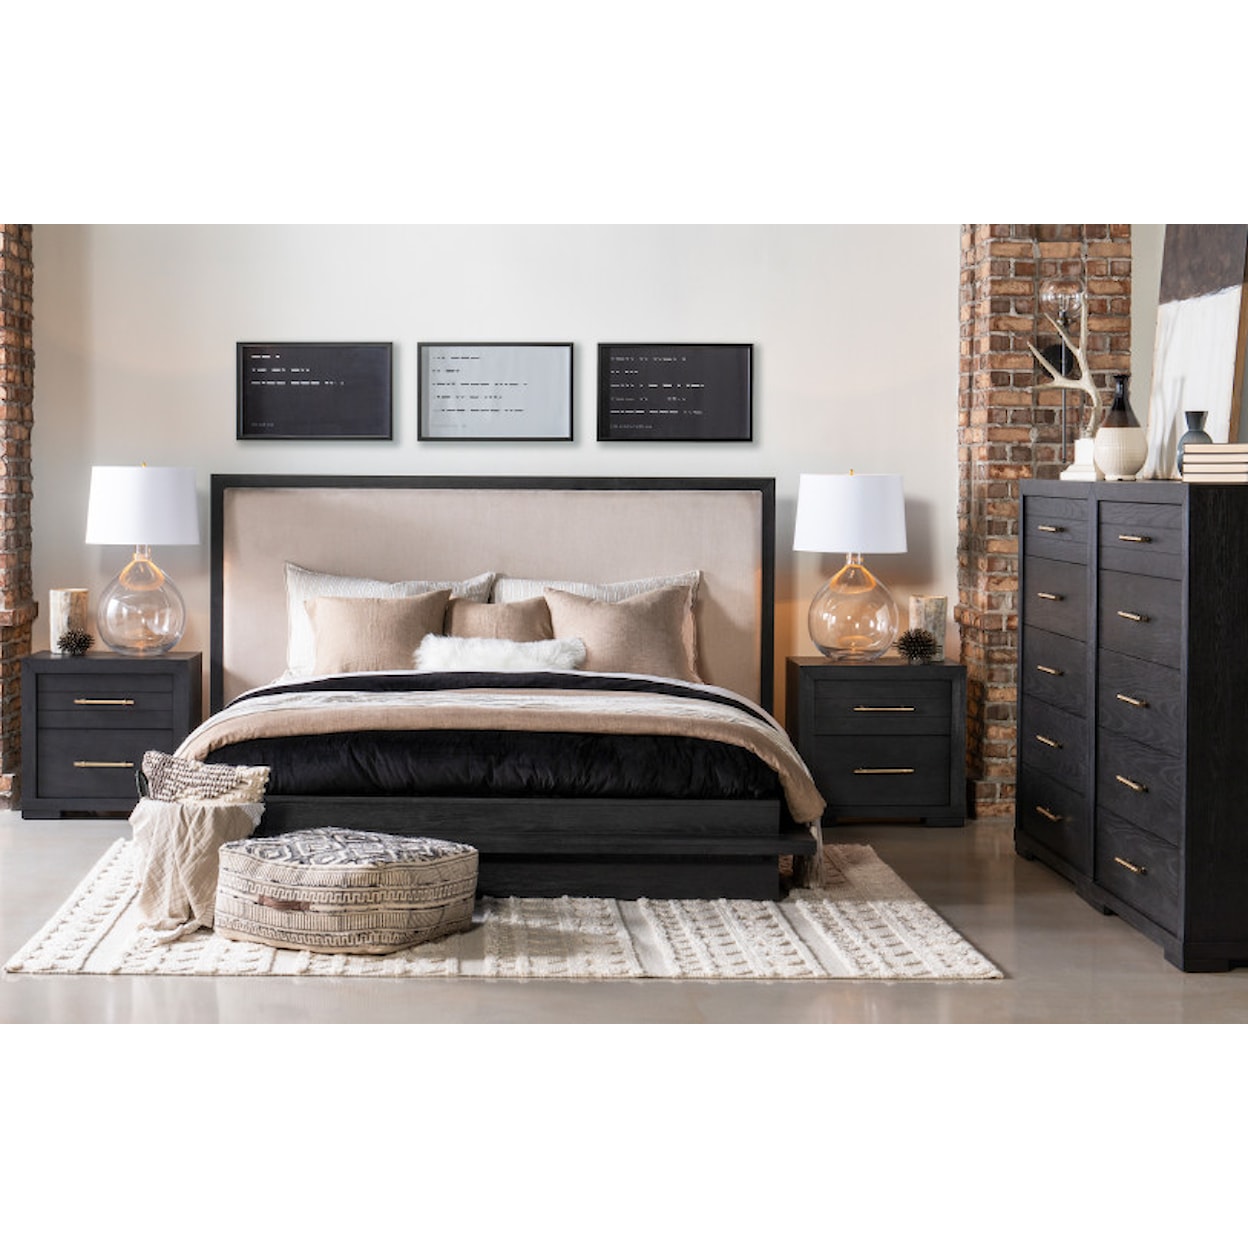 Legacy Classic Westwood California King Bedroom Group